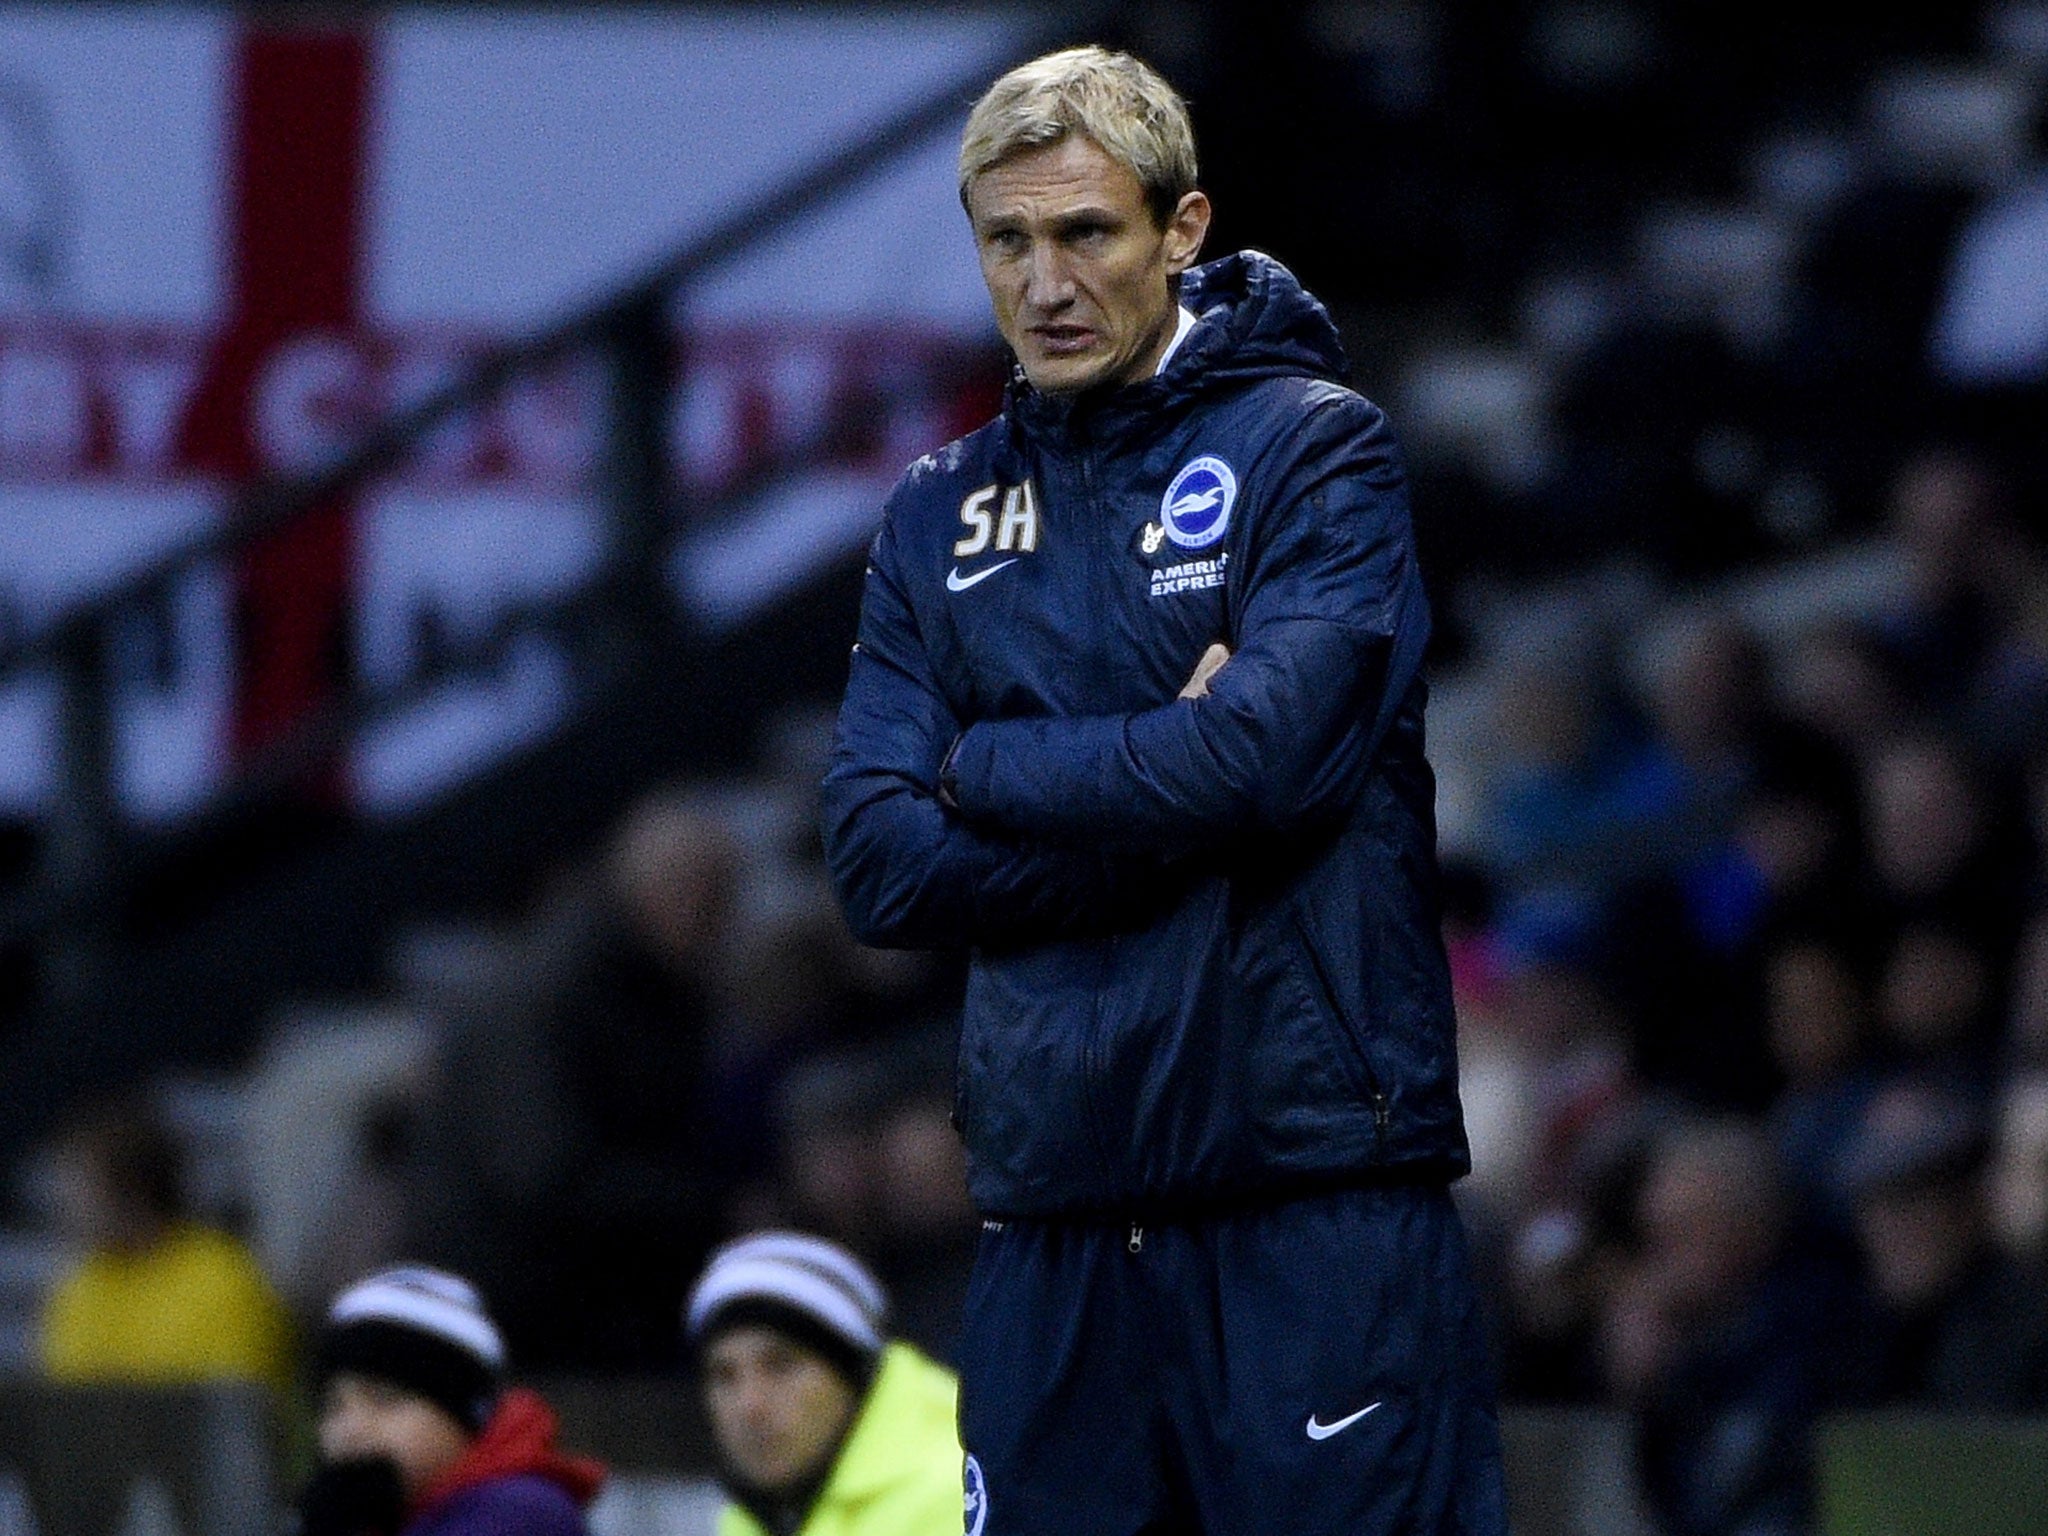 Sami Hyypia has been under pressure as his Brighton side have slipped into the bottom three